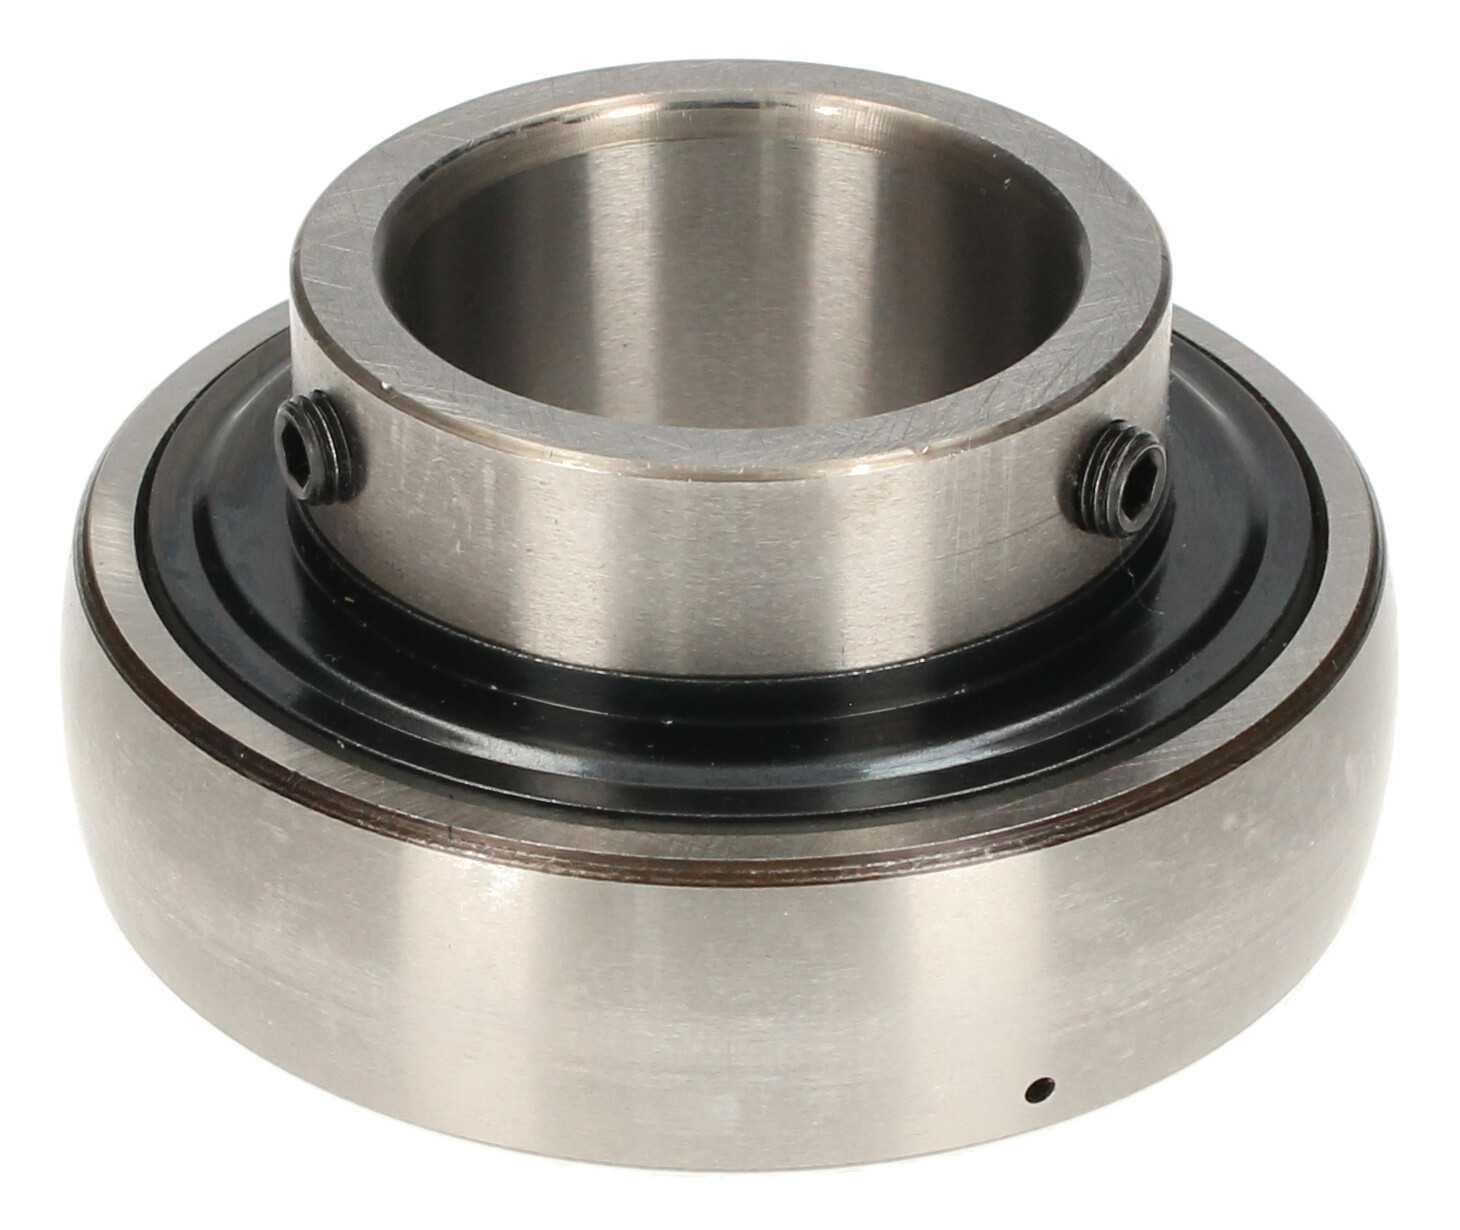 YAR-208-2F-SKF INSERTABLE BALL BEARING (WITHOUT PACKAGING) - Image 1